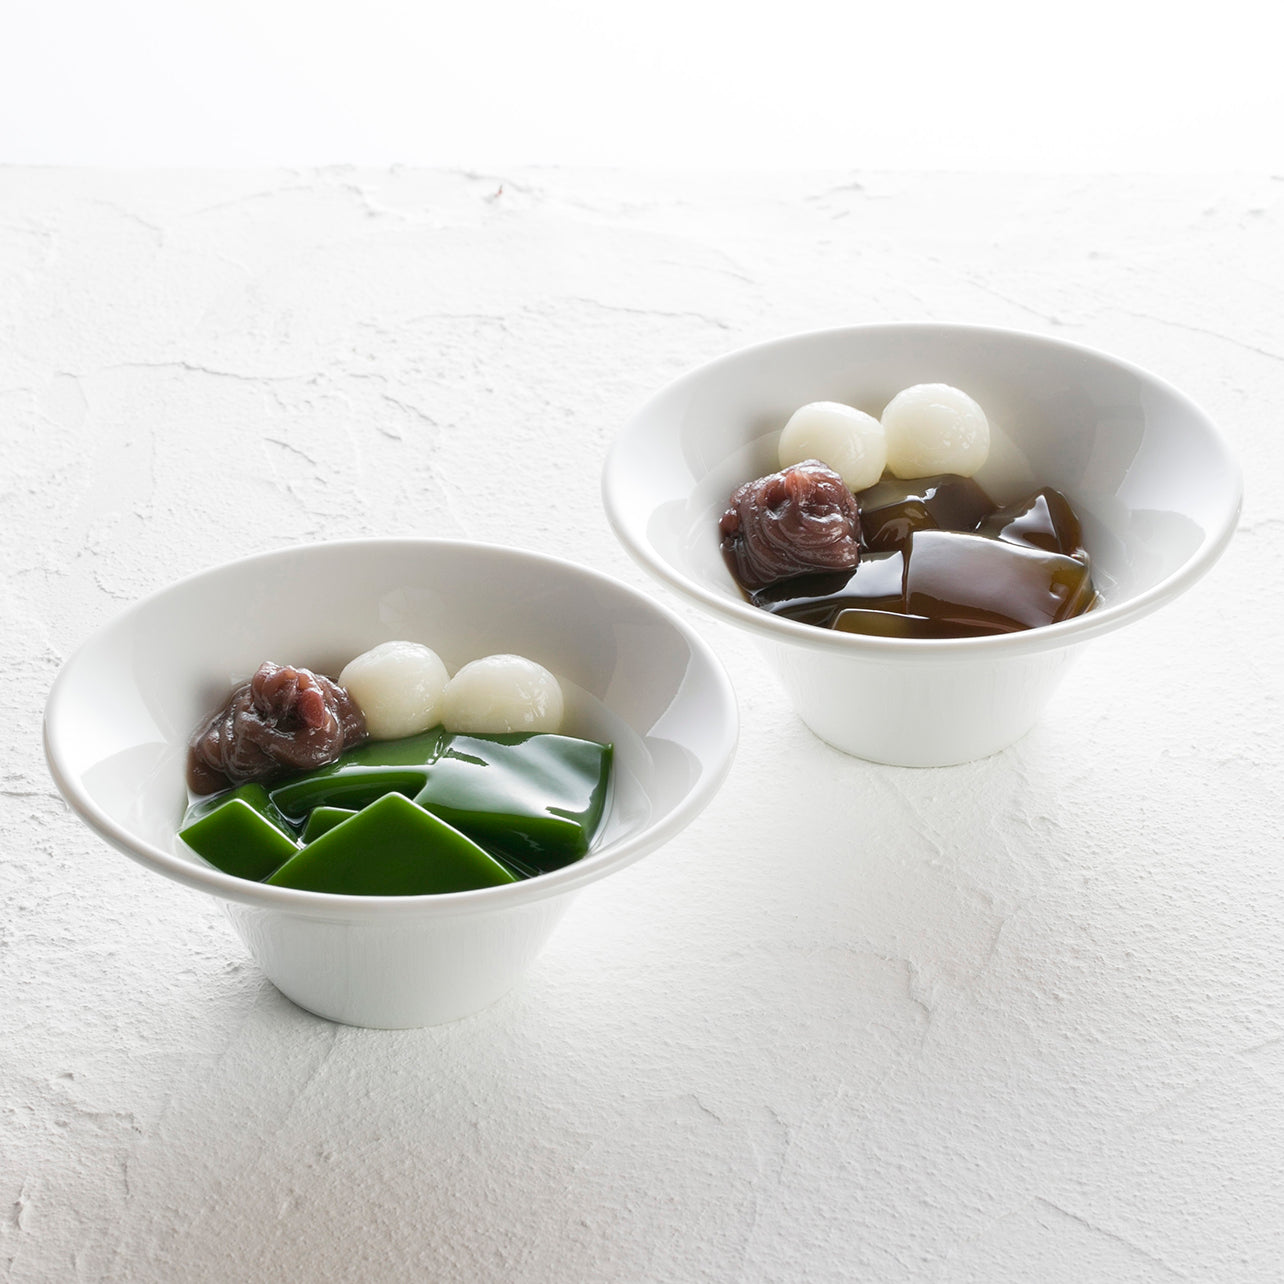 Assortment of 2 types of Namacha Jelly and Gateau Chocolat [Cup]